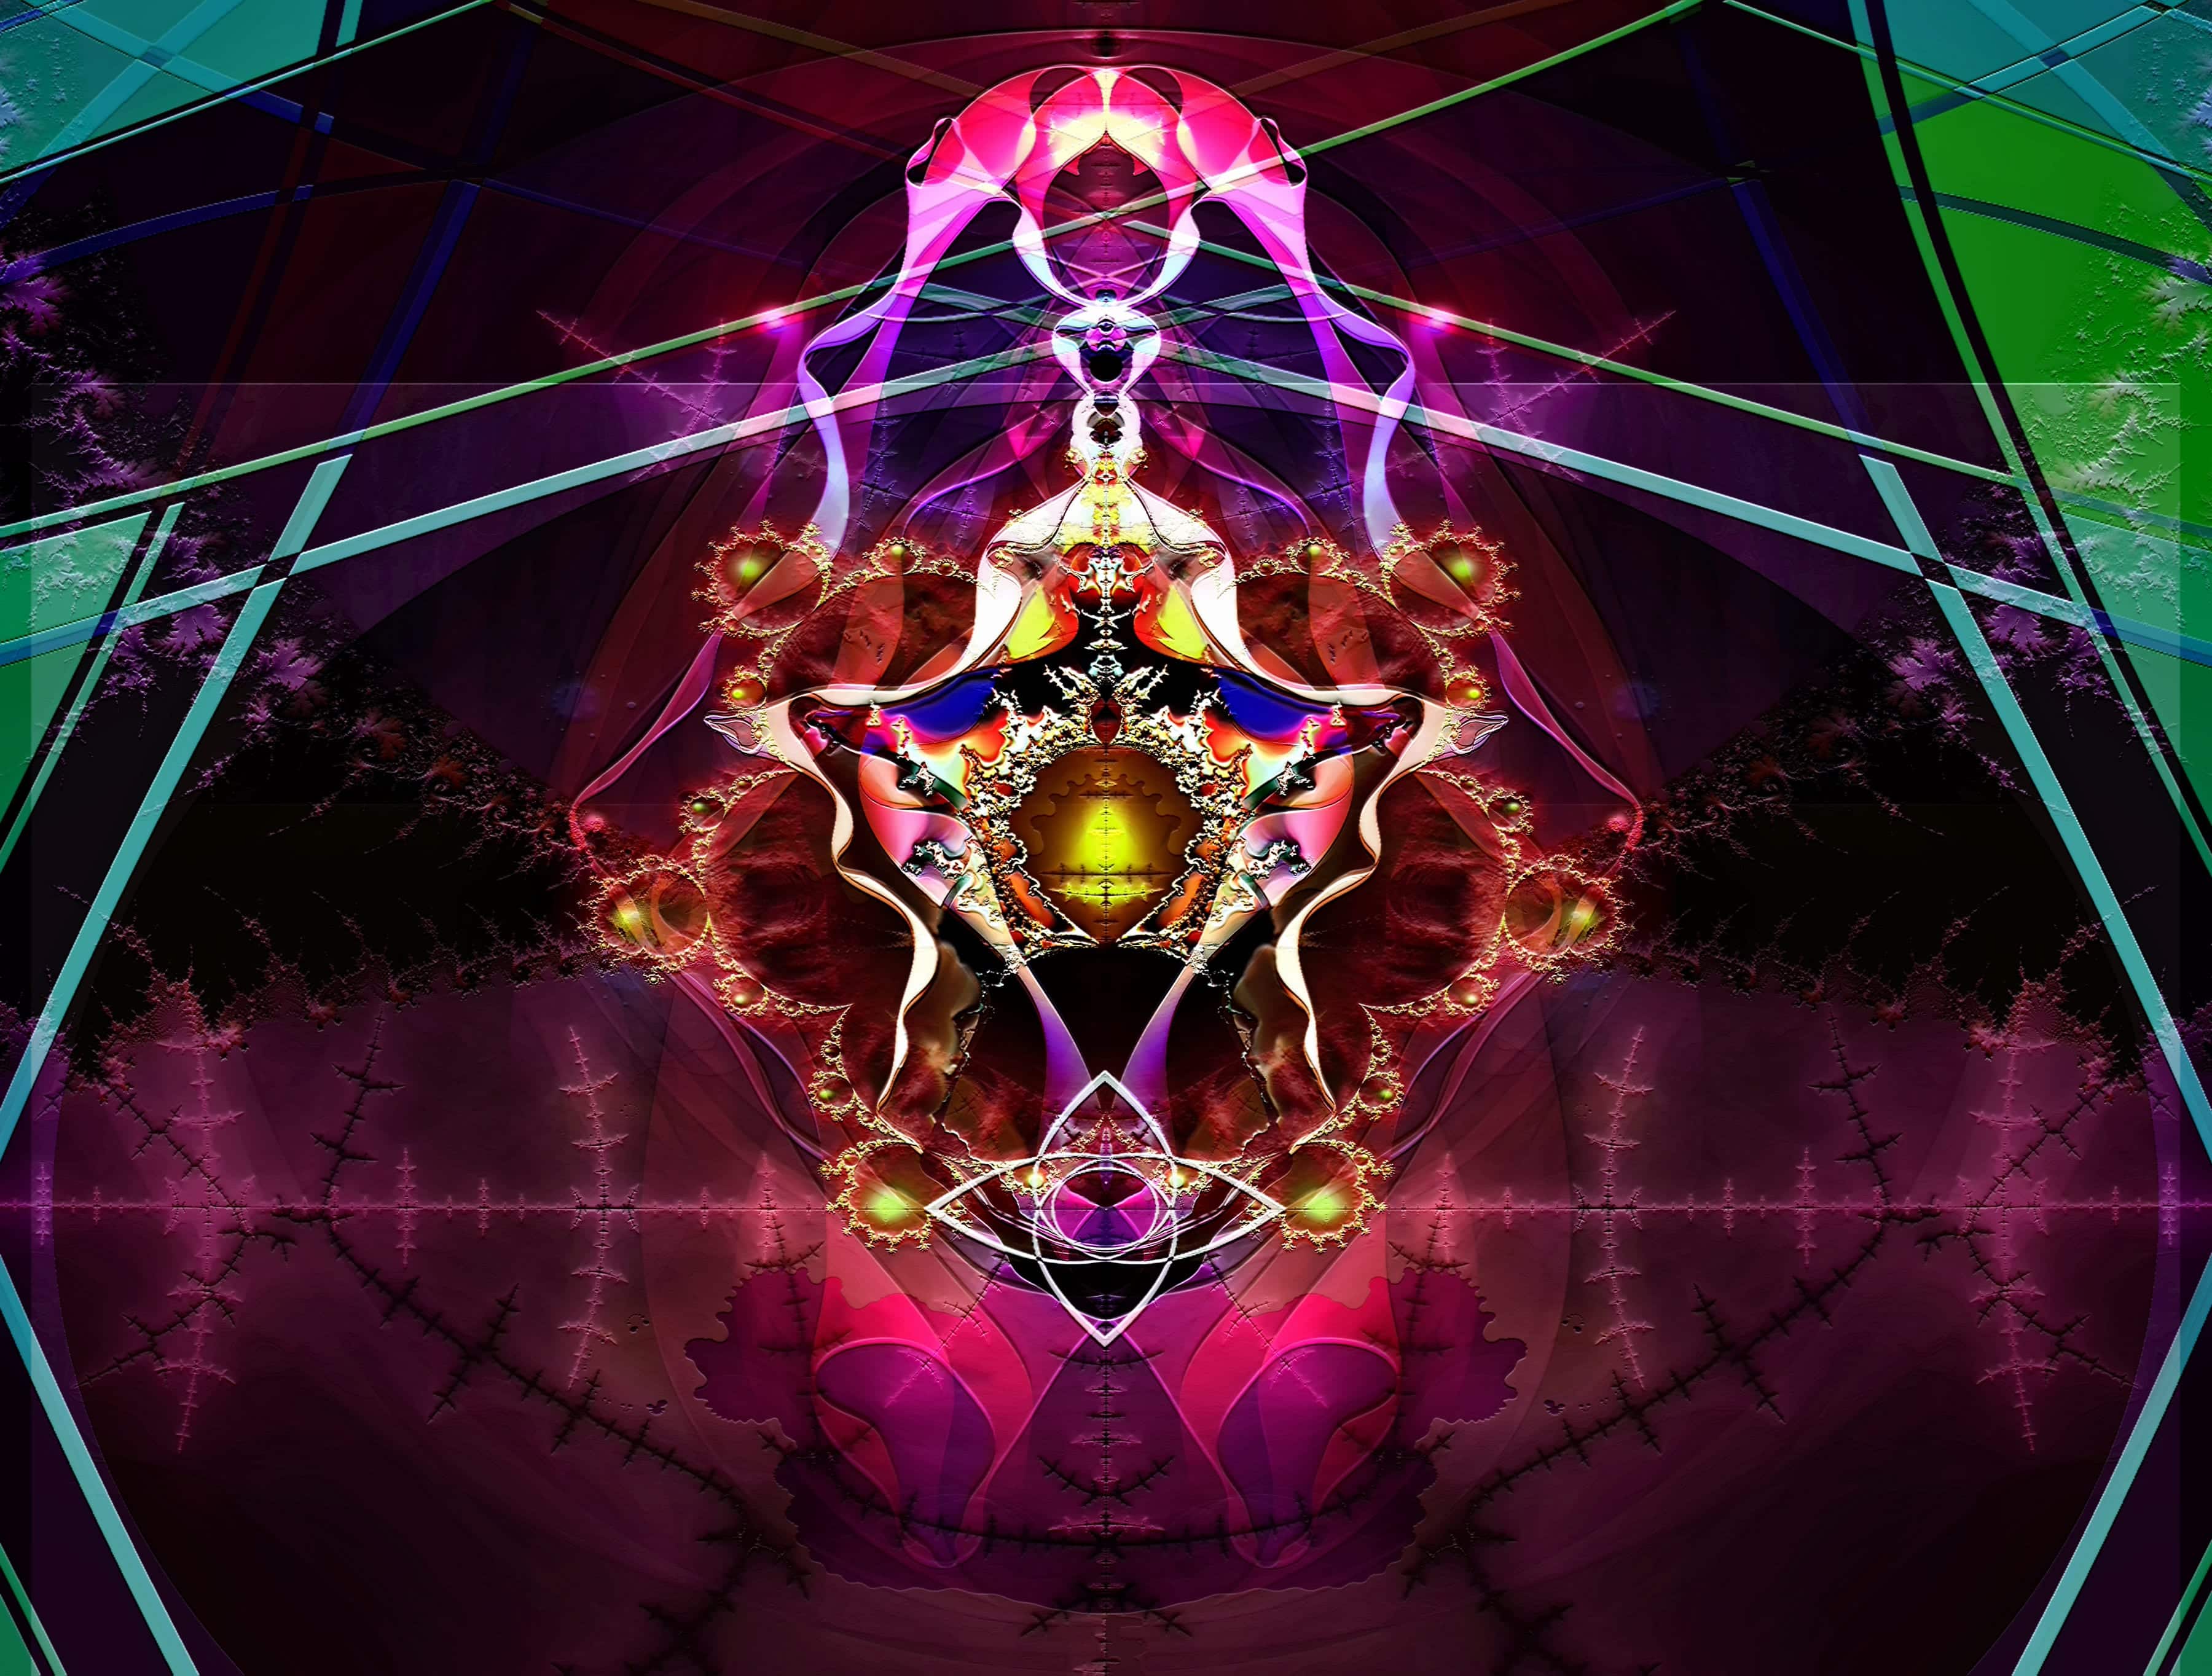 Fractal image of throne room with altar at center. Image only shows part of what is there in order to give an unobstructed view of things that would otherwise have been overlooked in the complexity.